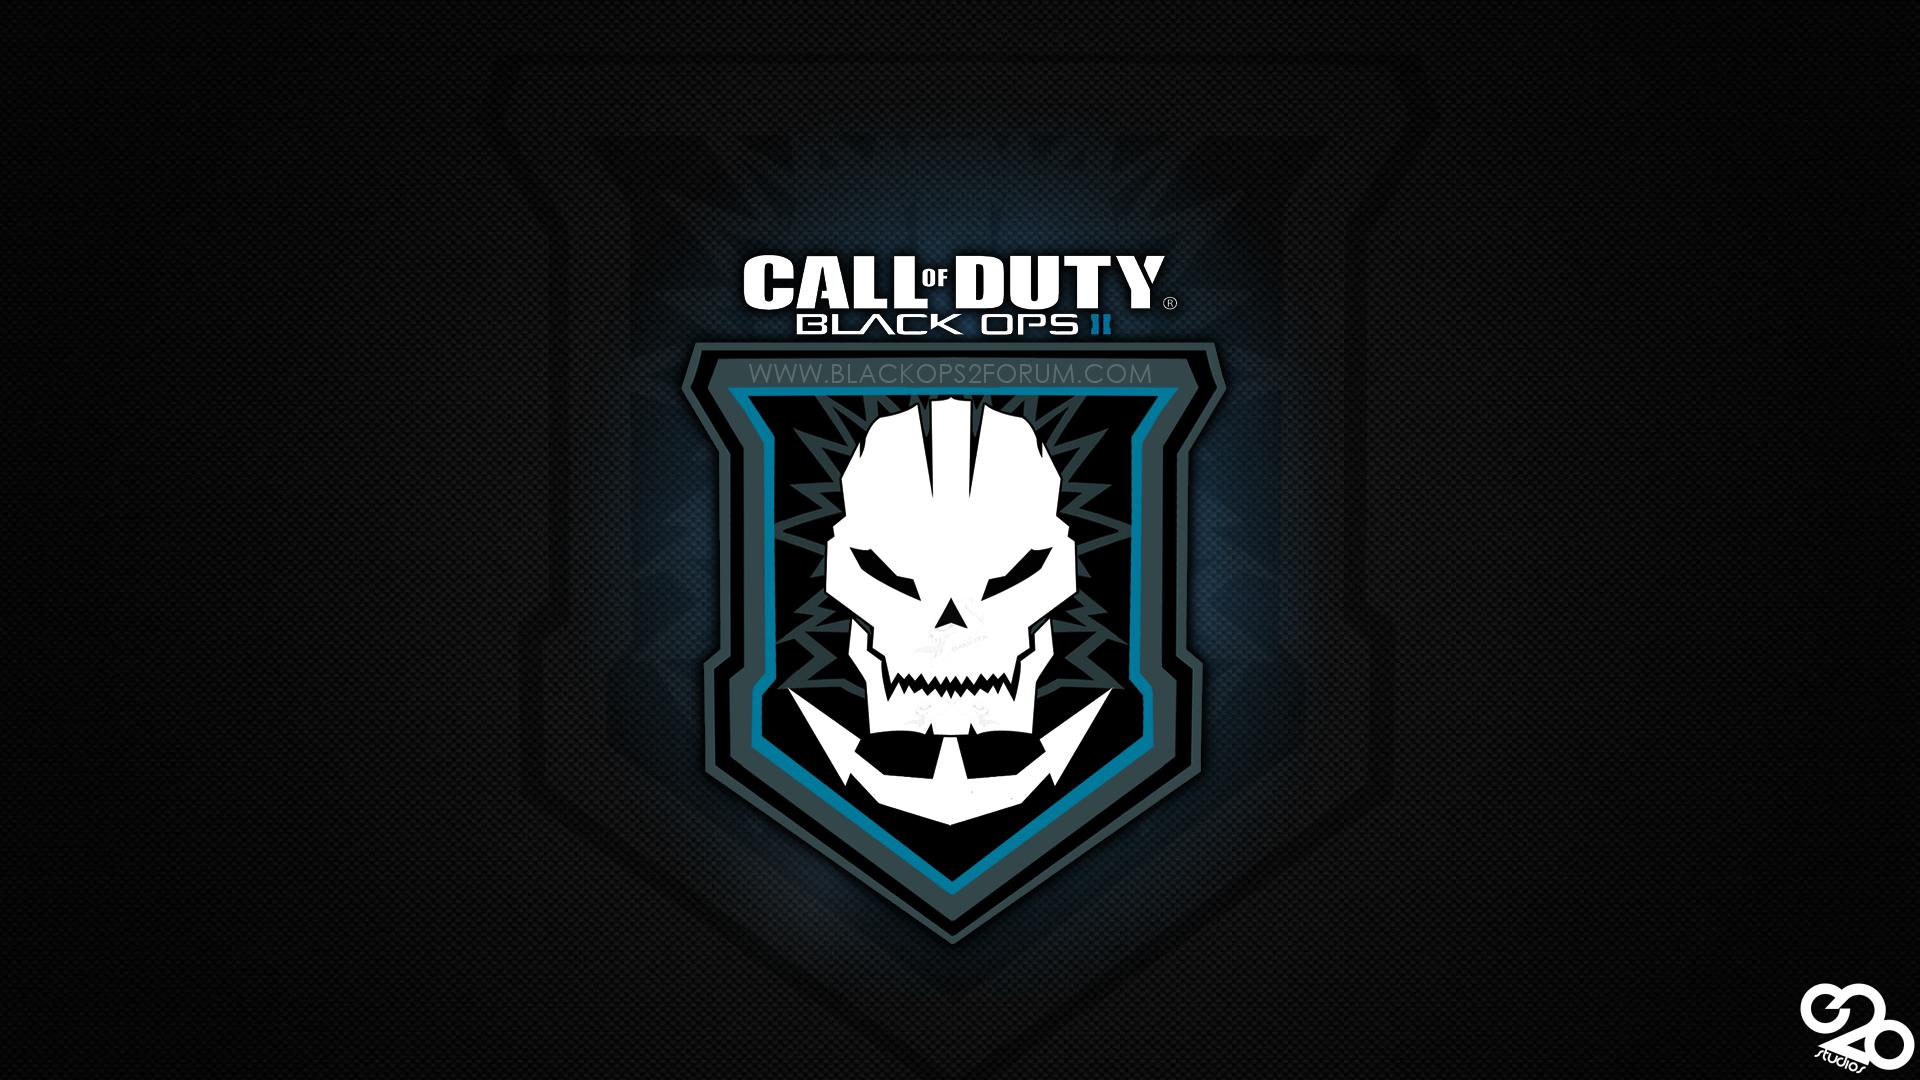 New Black Ops 2 Wallpaper enjoy. The Unofficial Call of Duty